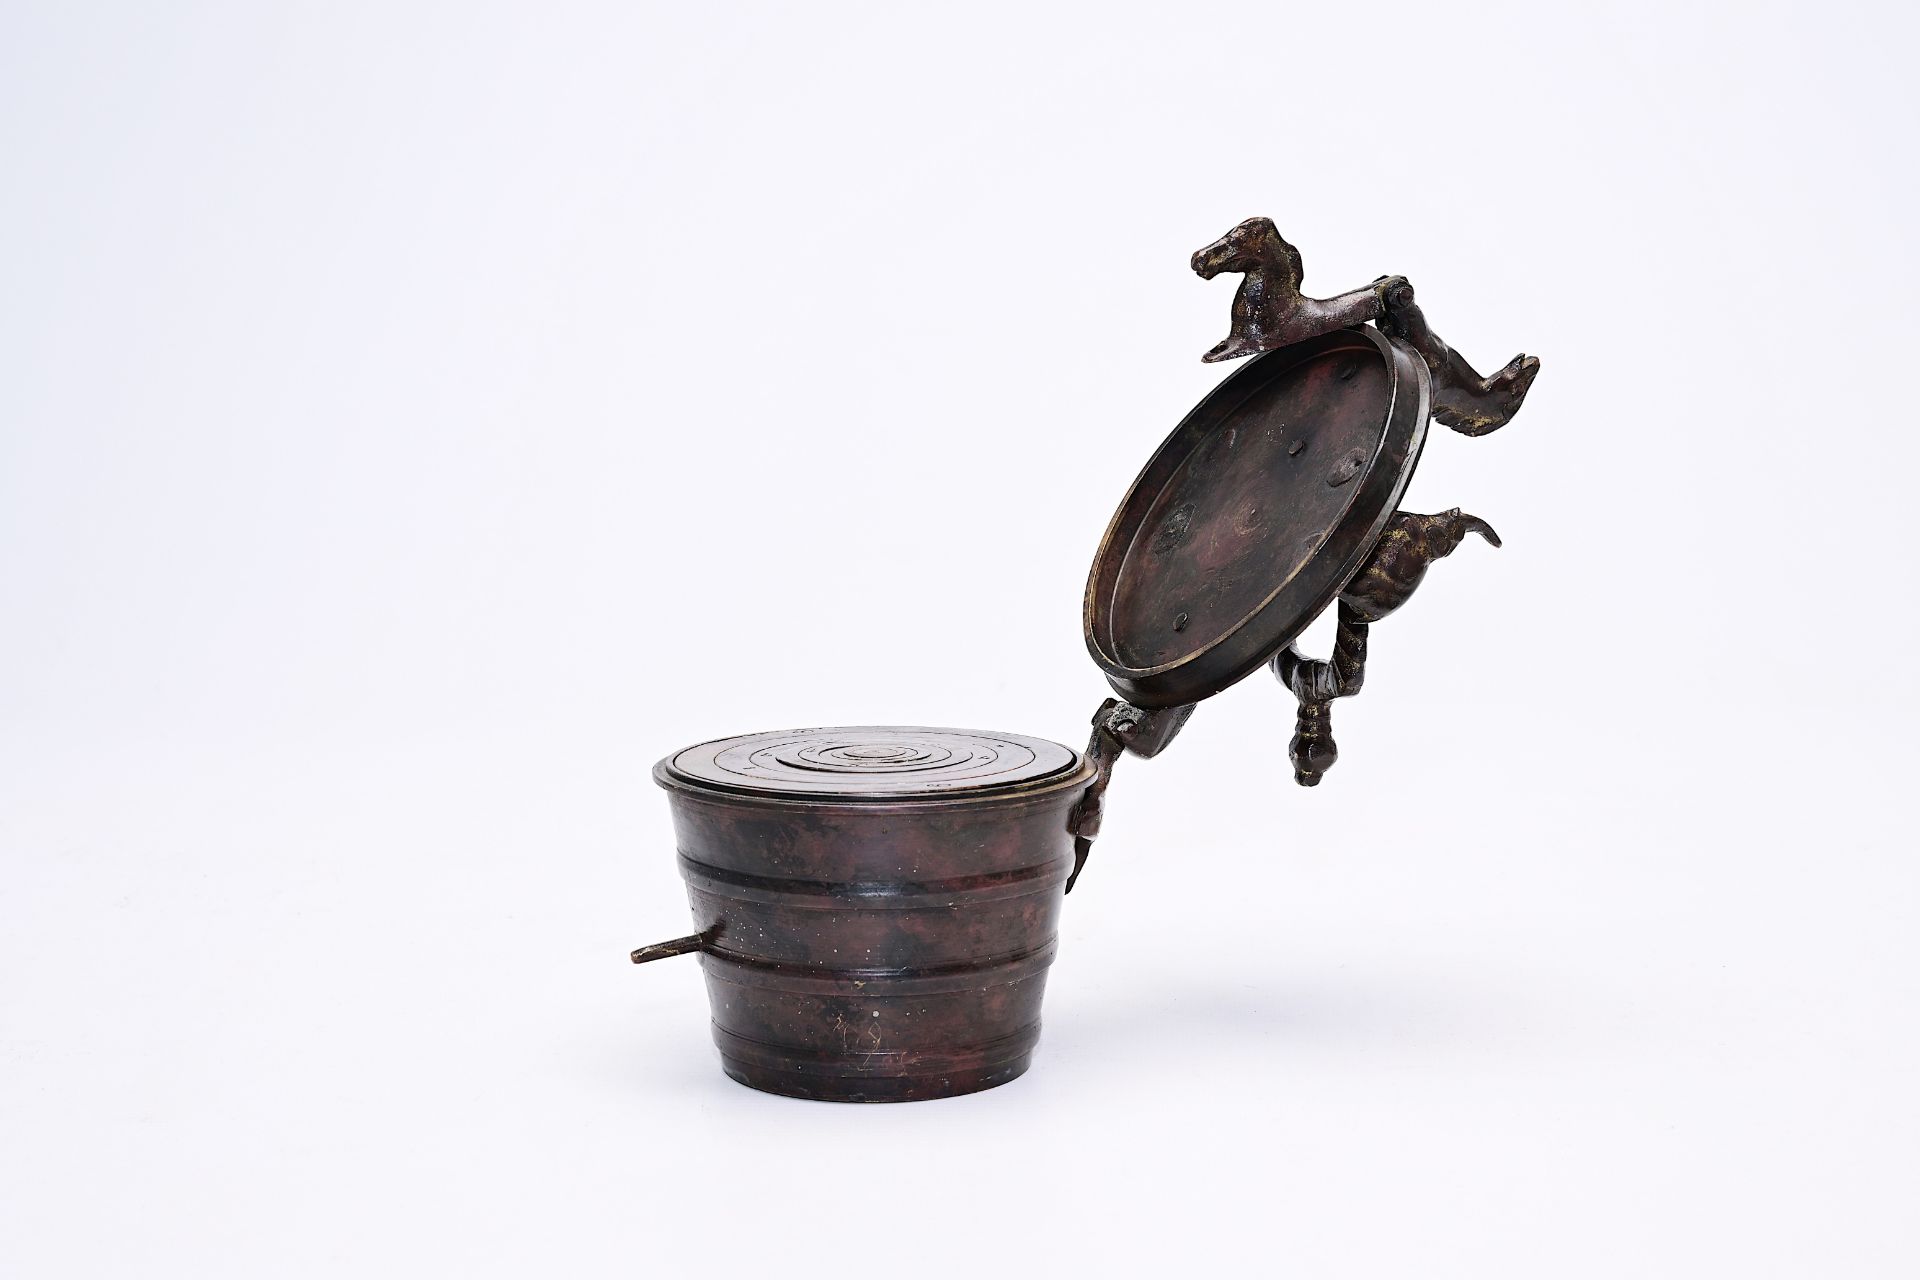 A set of bronze probably Portuguese colonial Nuremberg style nesting weights, ca. 1900 - Image 10 of 13